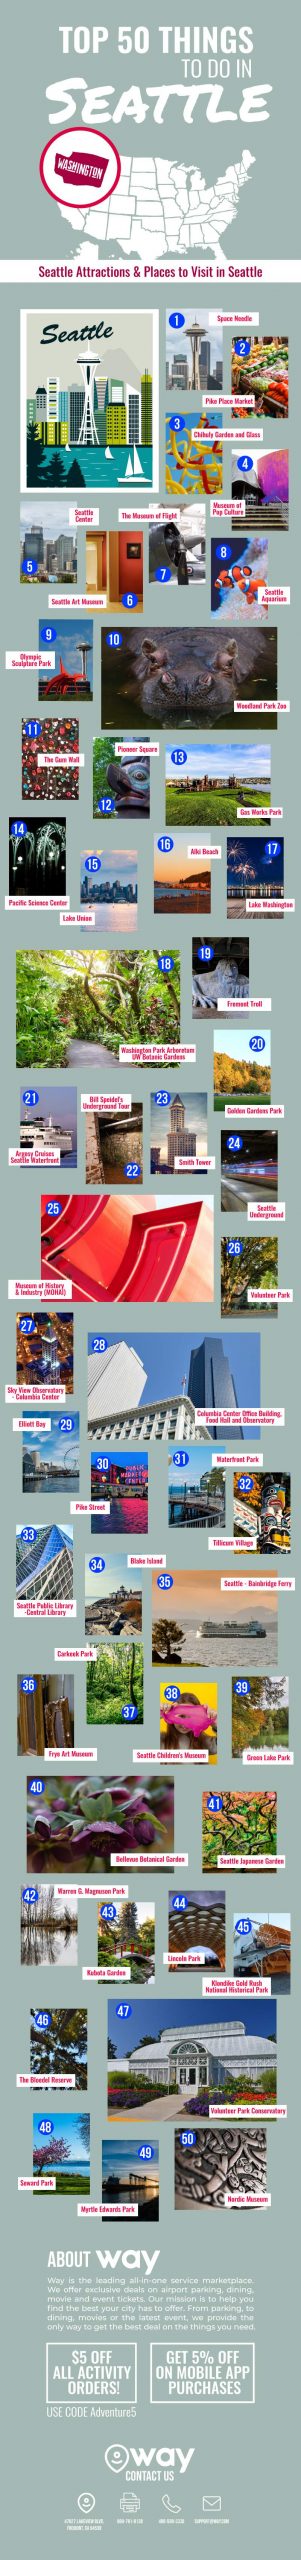 Top 50 Things to do in Seattle